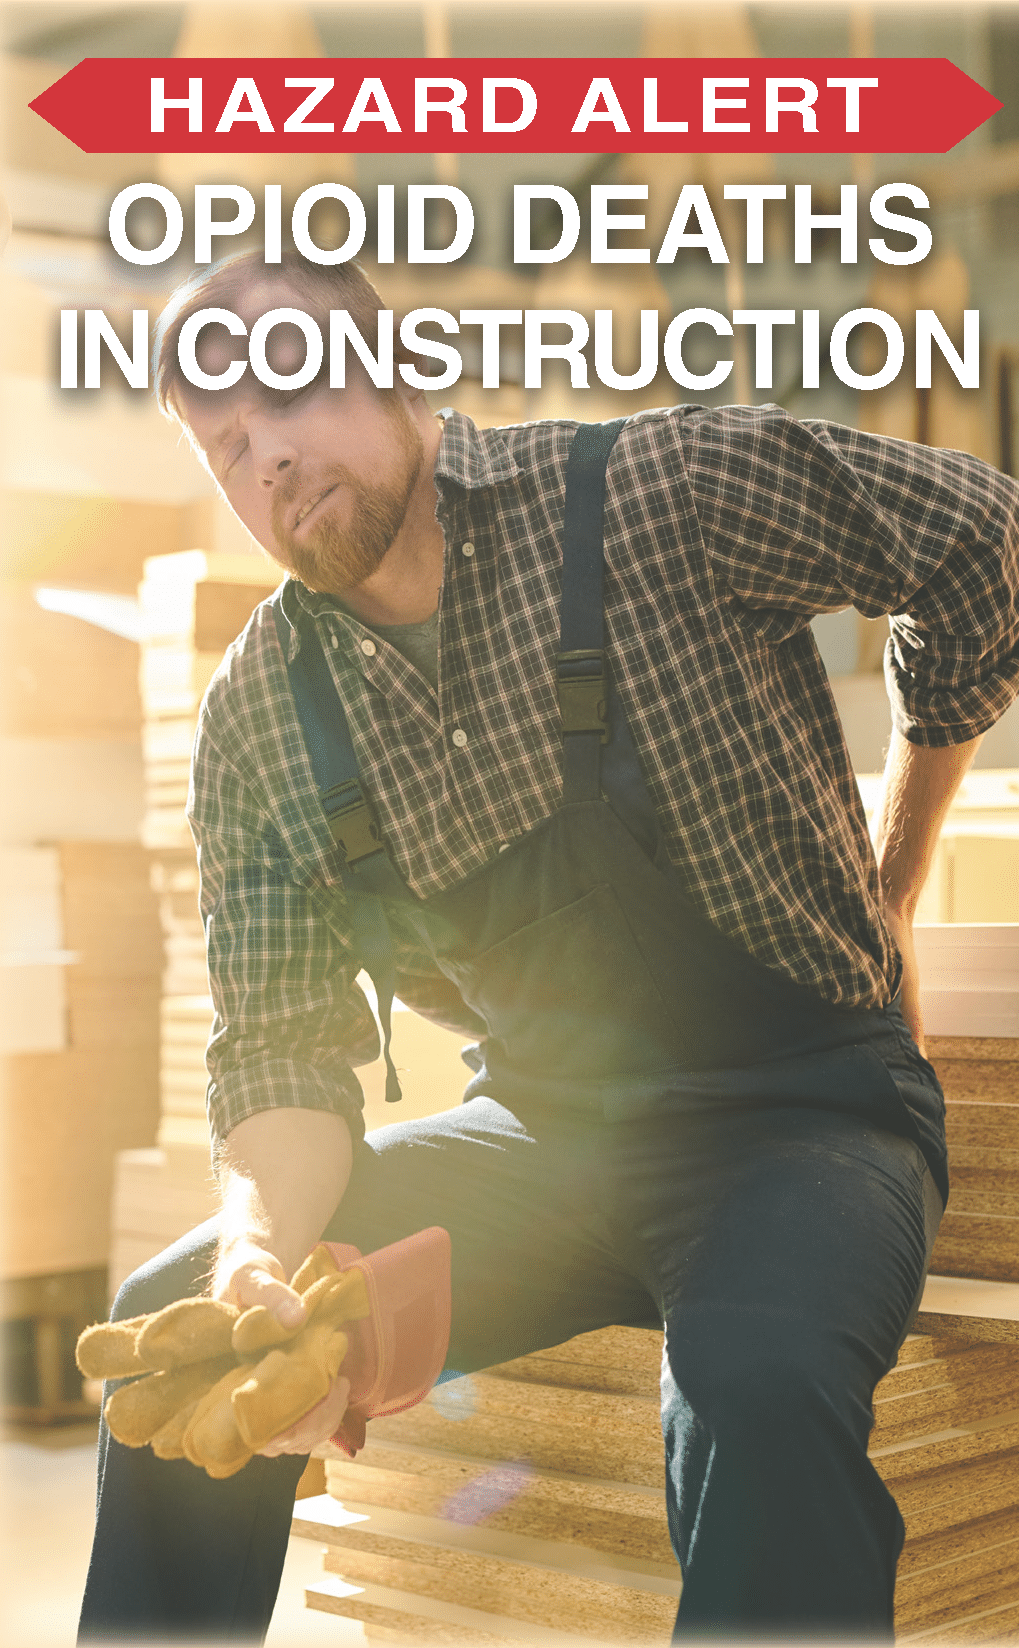 cover of opioid hazard alert featuring a man in a plaid shirt and overalls sitting down with his hand placed on his back conveying pain.